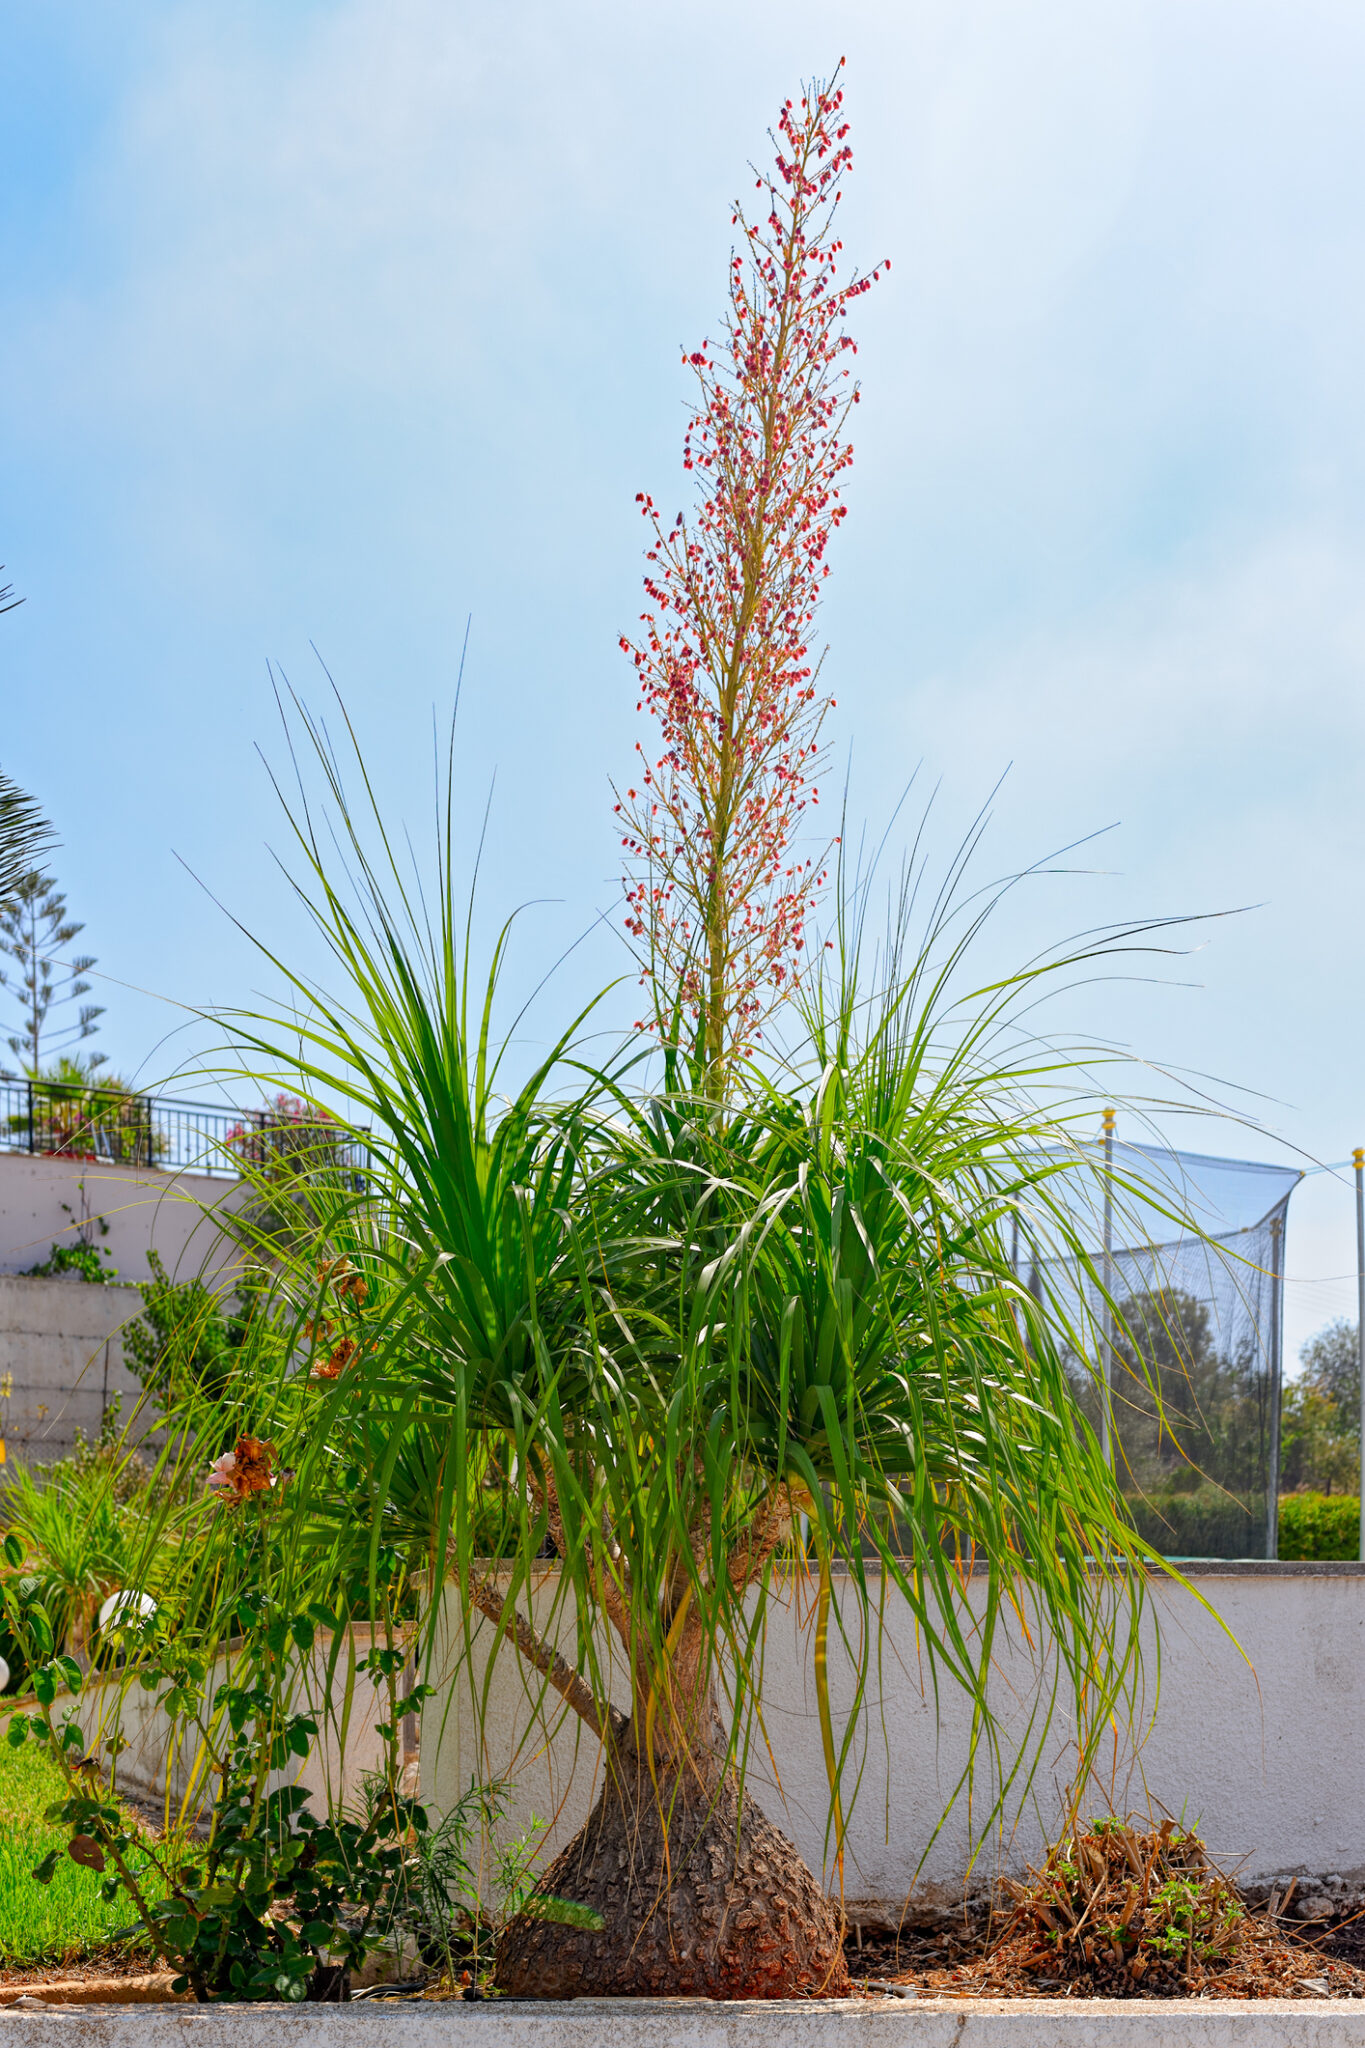 Ponytail palm outdoors with floral spike